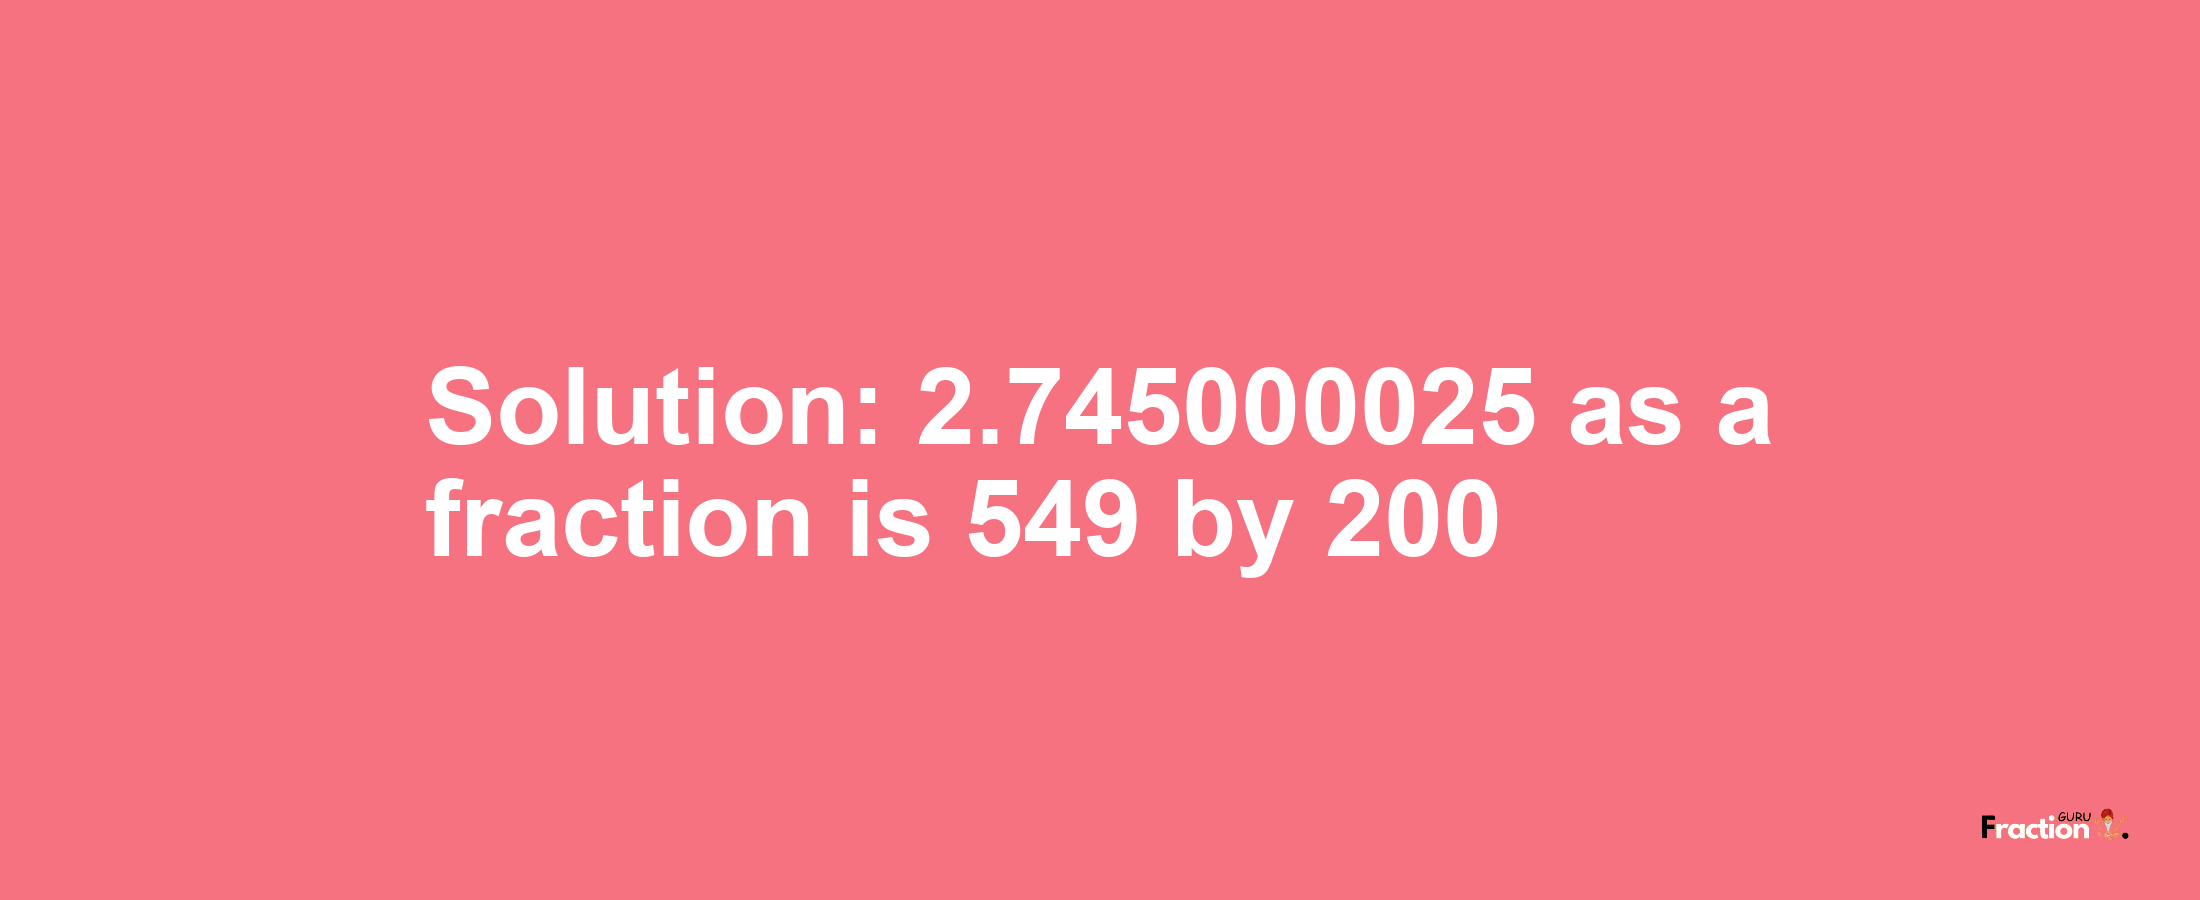 Solution:2.745000025 as a fraction is 549/200